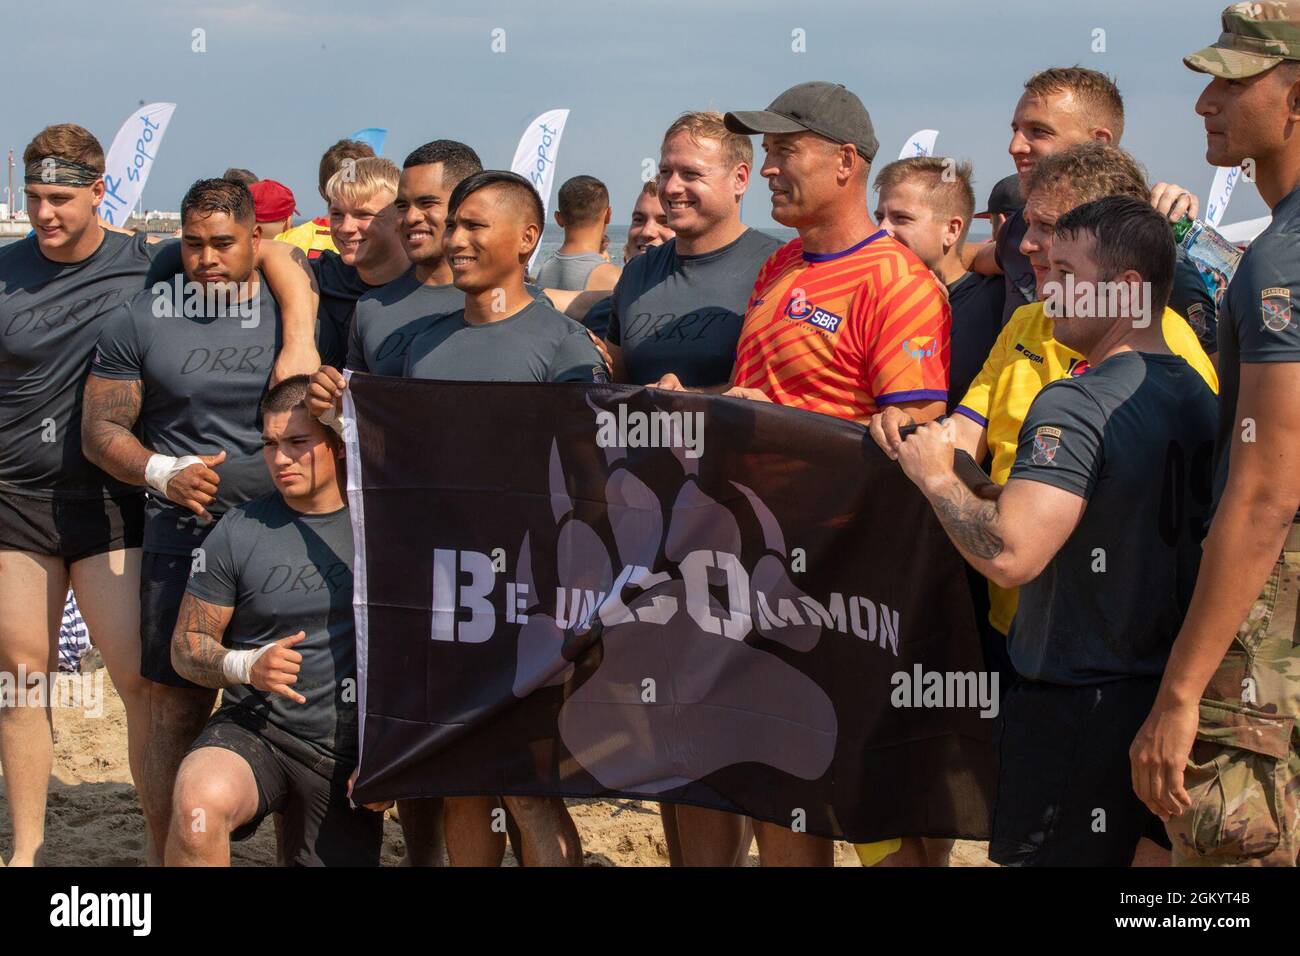 Soldiers from 3rd Battalion “Dark Rifles,” 161st Infantry Regiment present a unit flag to the president of Sopot, Poland, Jacek Karnowski, during the 9th Sopot International Beach Rugby Tournament in Sopot, Poland, July 31, 2021. The 3-161 is a Washington Army National Guard battalion on deployment as part of NATO’s Enhanced Forward Presence, Battle Group Poland to enhance interoperability. Stock Photo